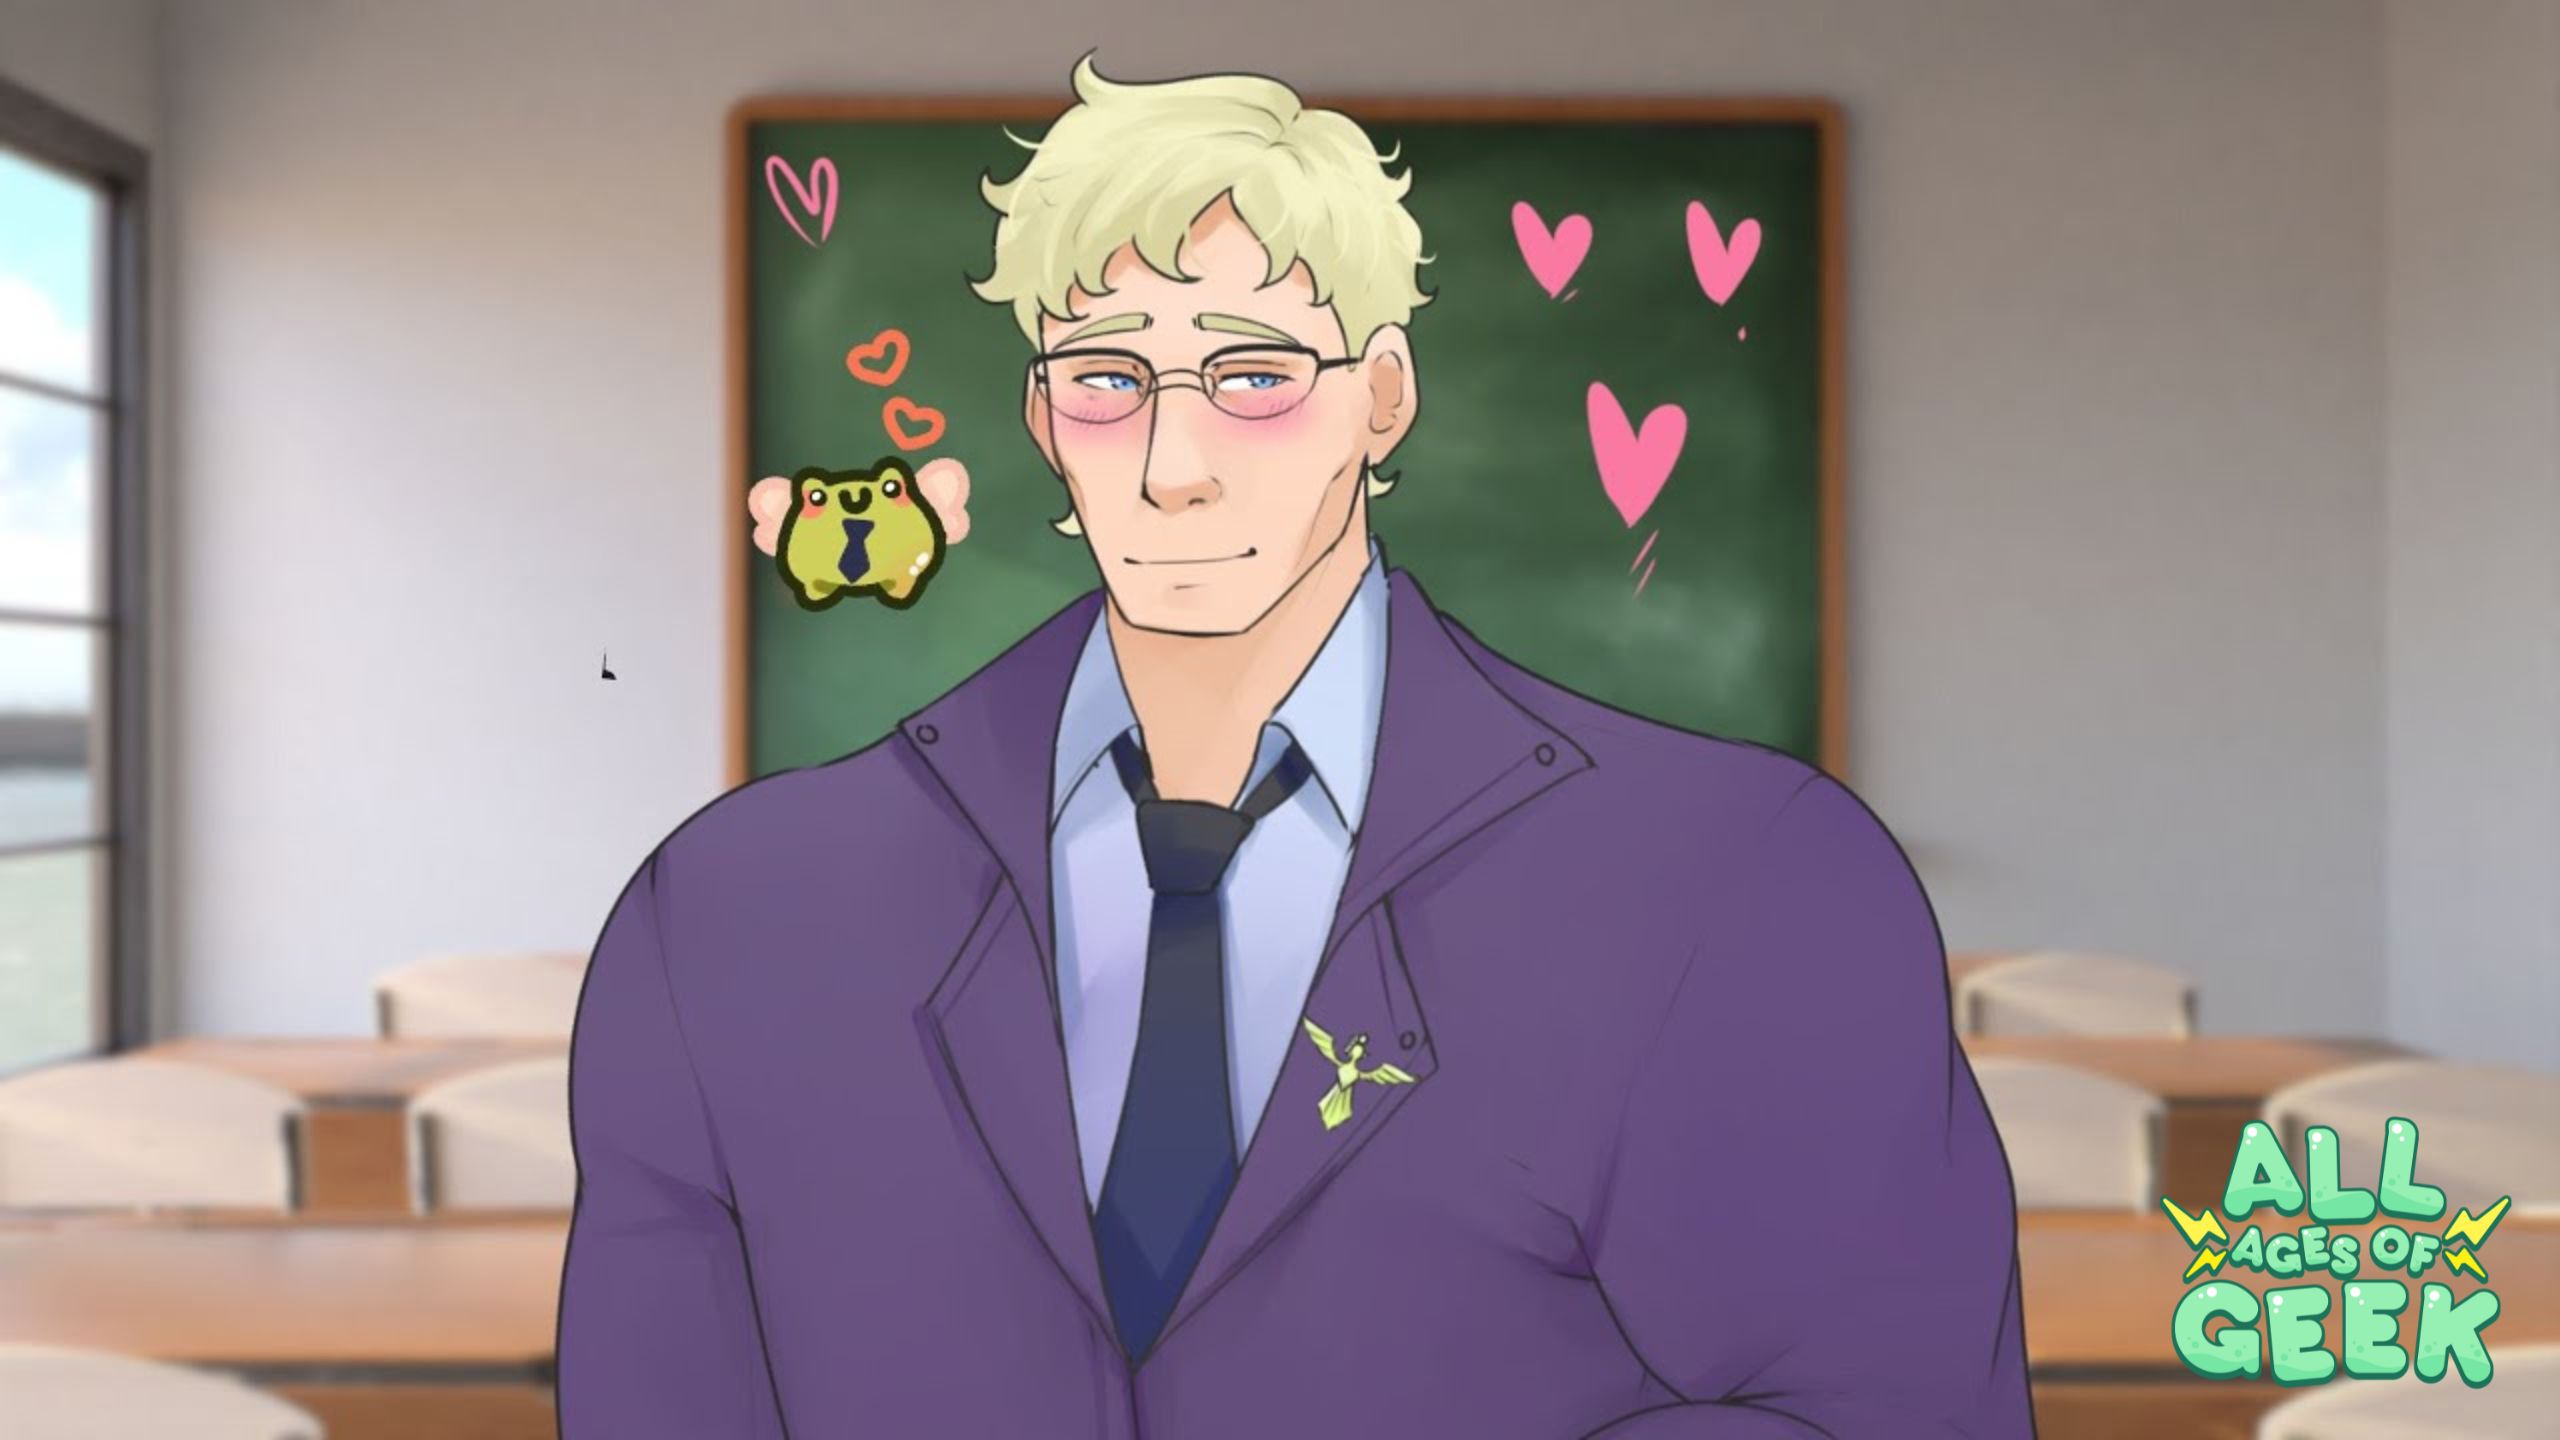 Conrad is with a frog Conrad is muscular and has blonde hair and glasses from I MARRIED A MONSTER ON A HILL